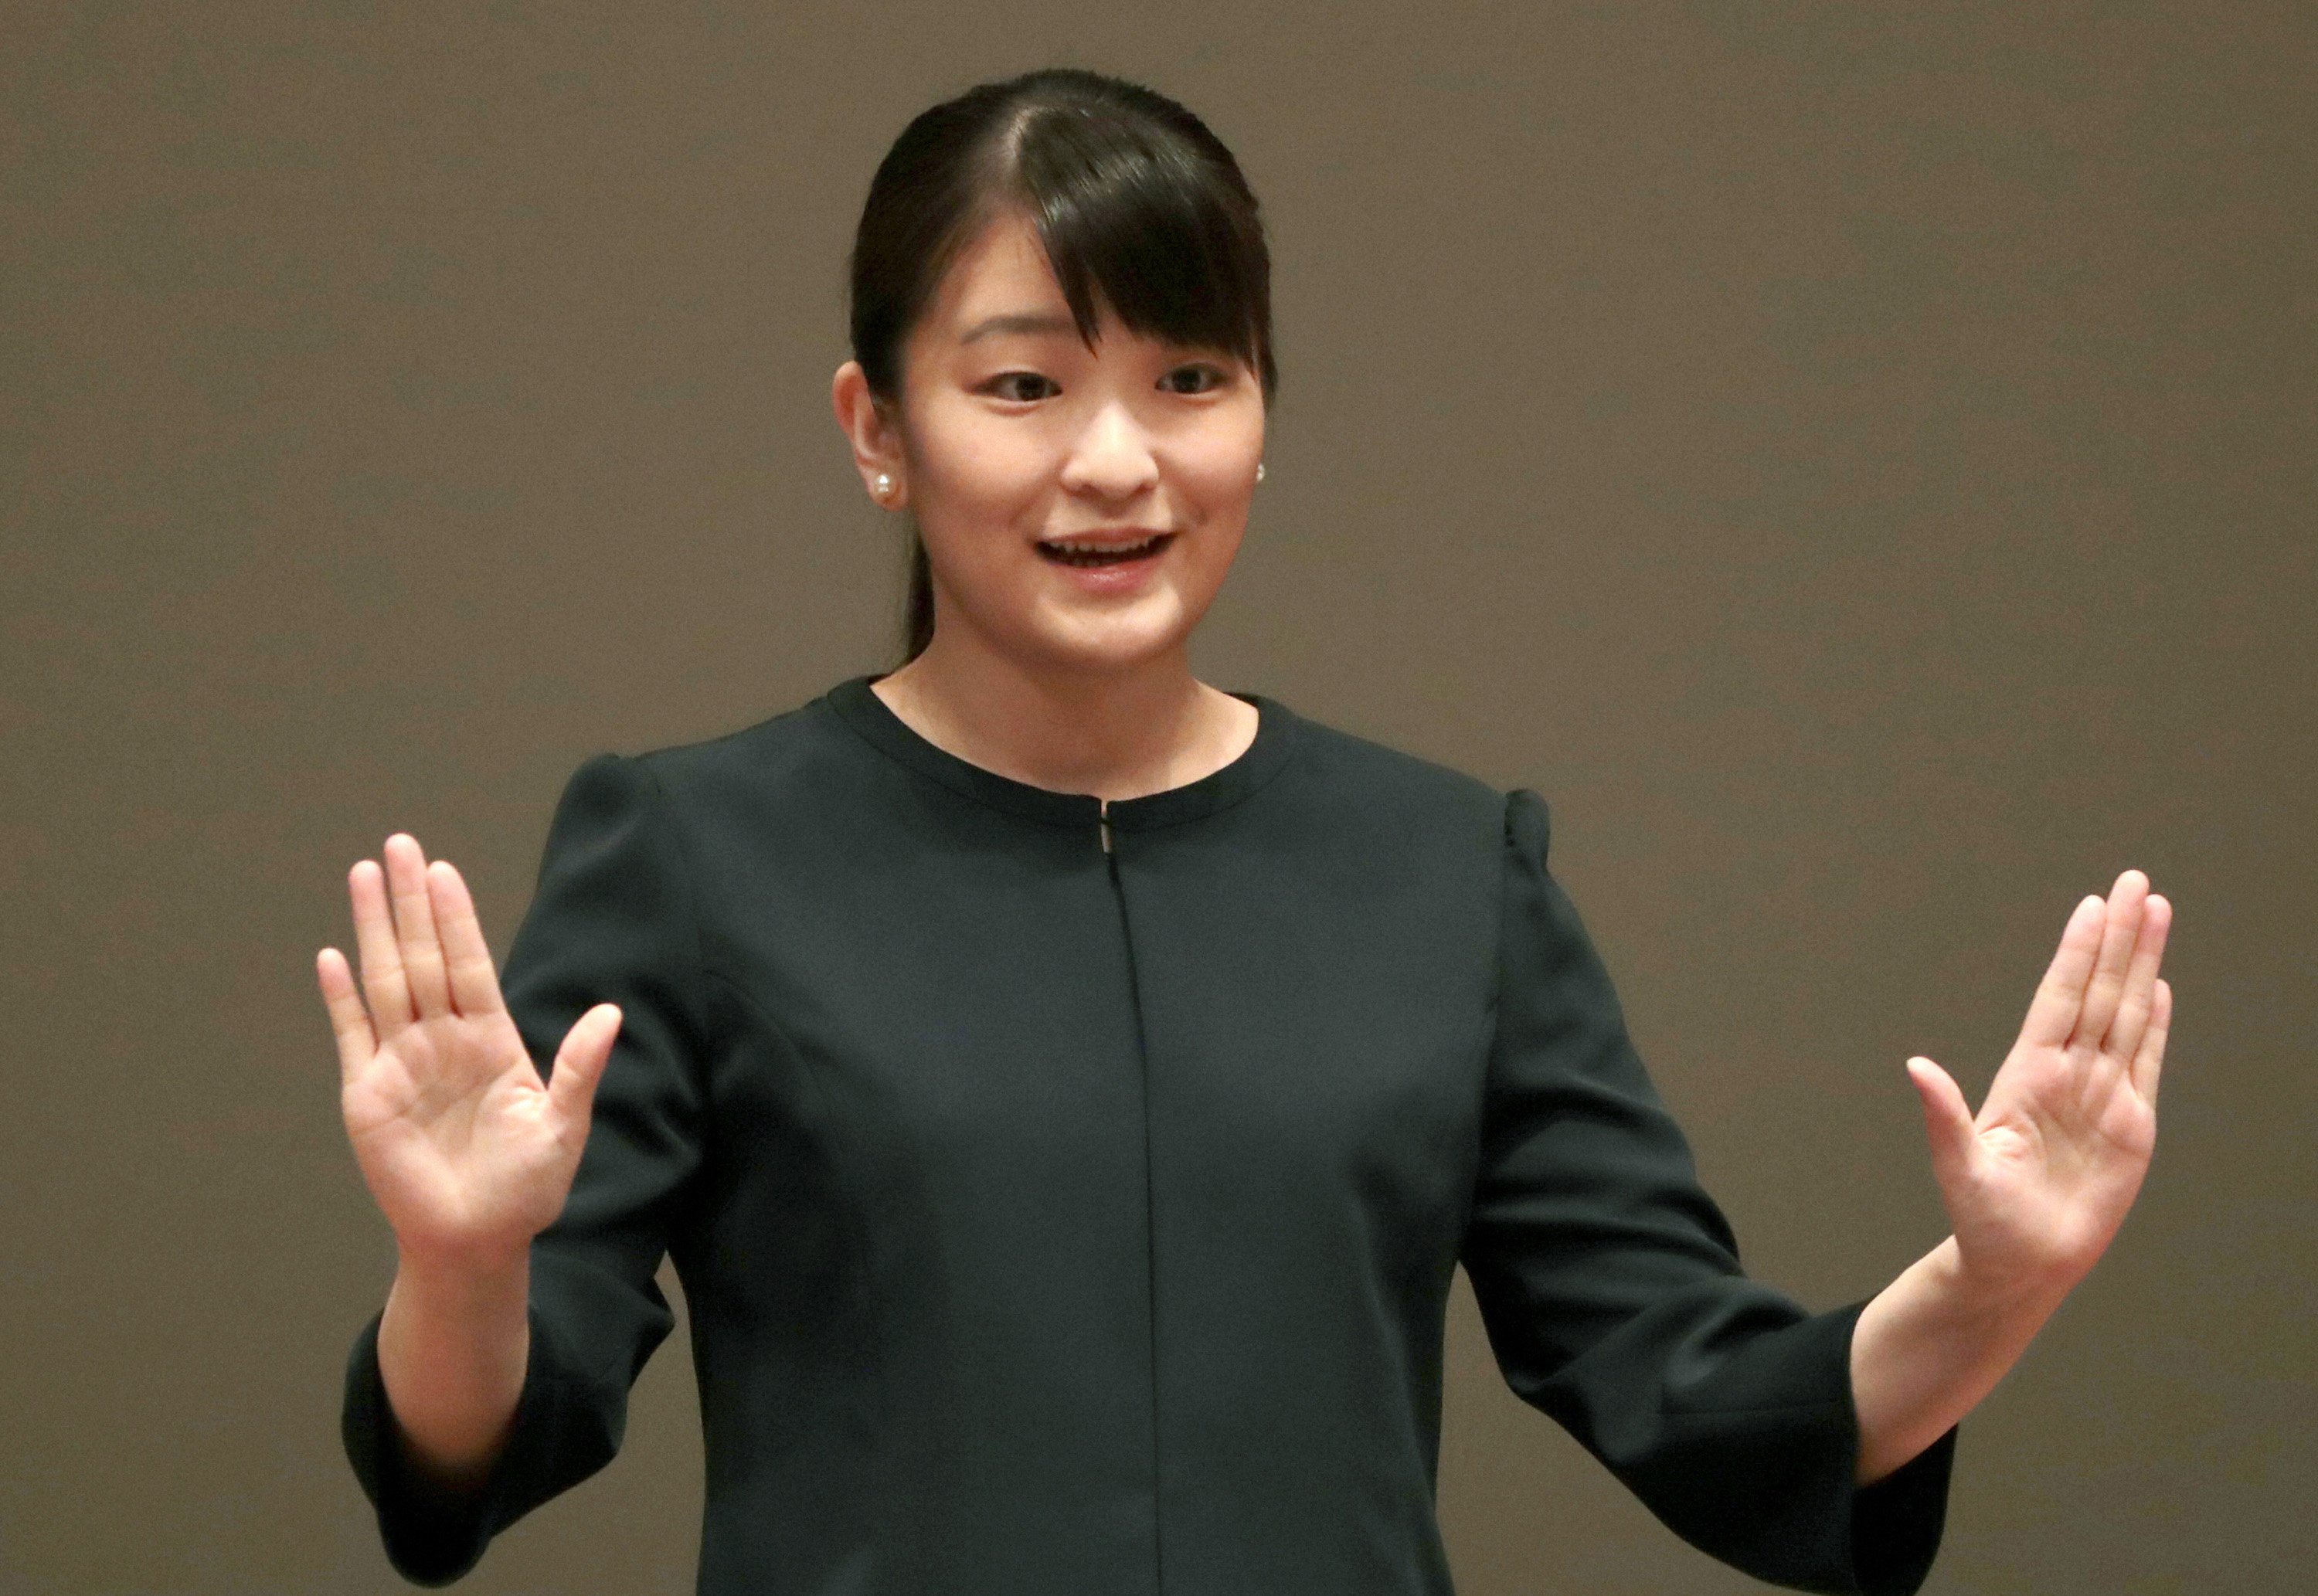 Princess Mako of Akishino speaks with finger language at the opening ceremony of the National High School Student Finger Language Contest at Yurakucho Asahi Hall on August 24, 2019 in Tokyo, Japan | Source: Getty Images